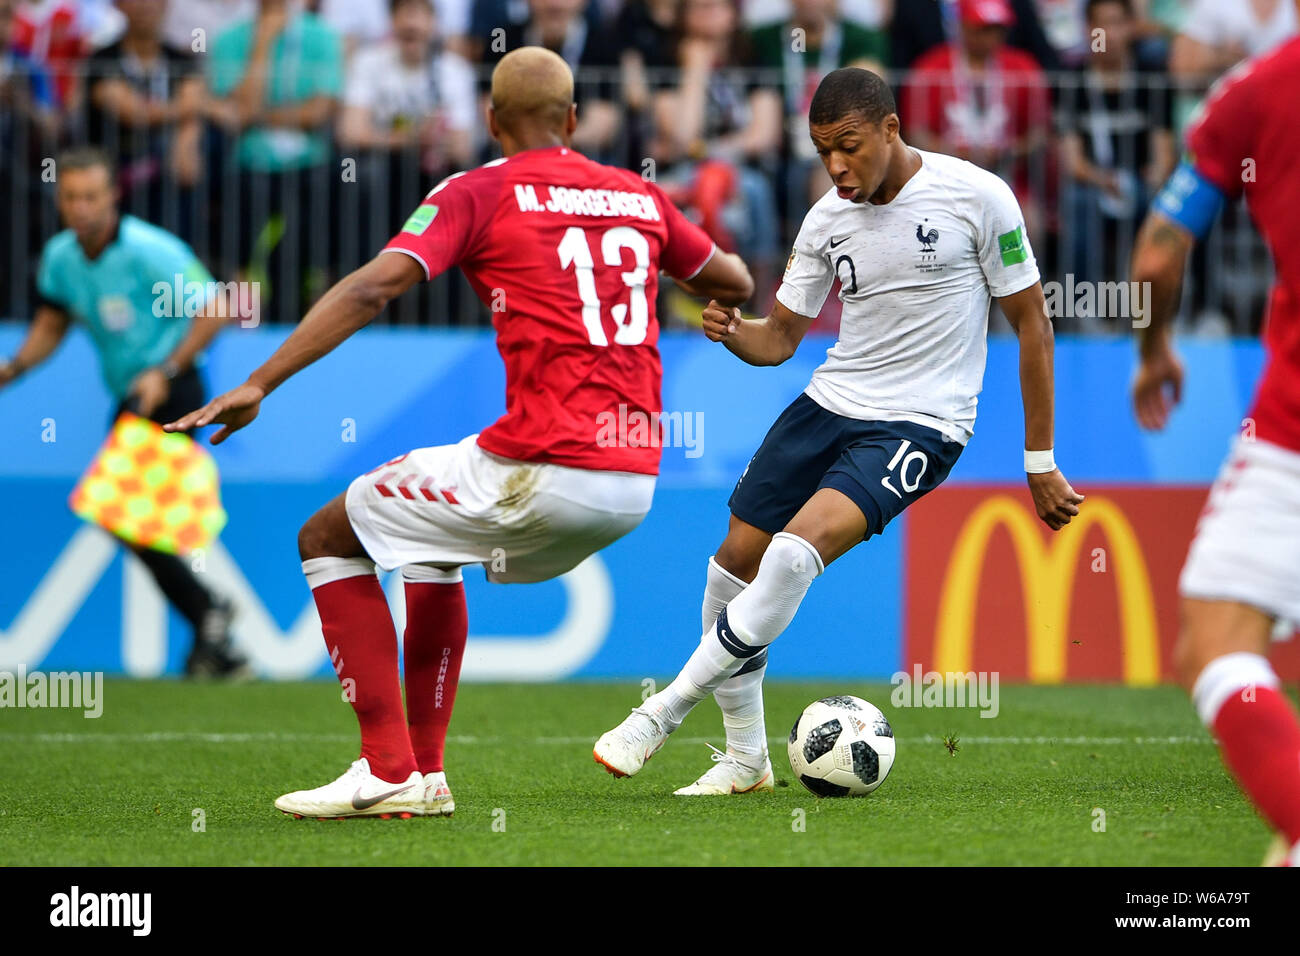 Moscow, Russland. 15th July, 2018. Presentation ceremony of the new World  Champion France: Kylian Mbappe (France) with the World Cup. GES/Football/World  Championship 2018 Russia, Final: France - Croatia, 15.07.2018  GES/Soccer/Football, Worldcup 2018